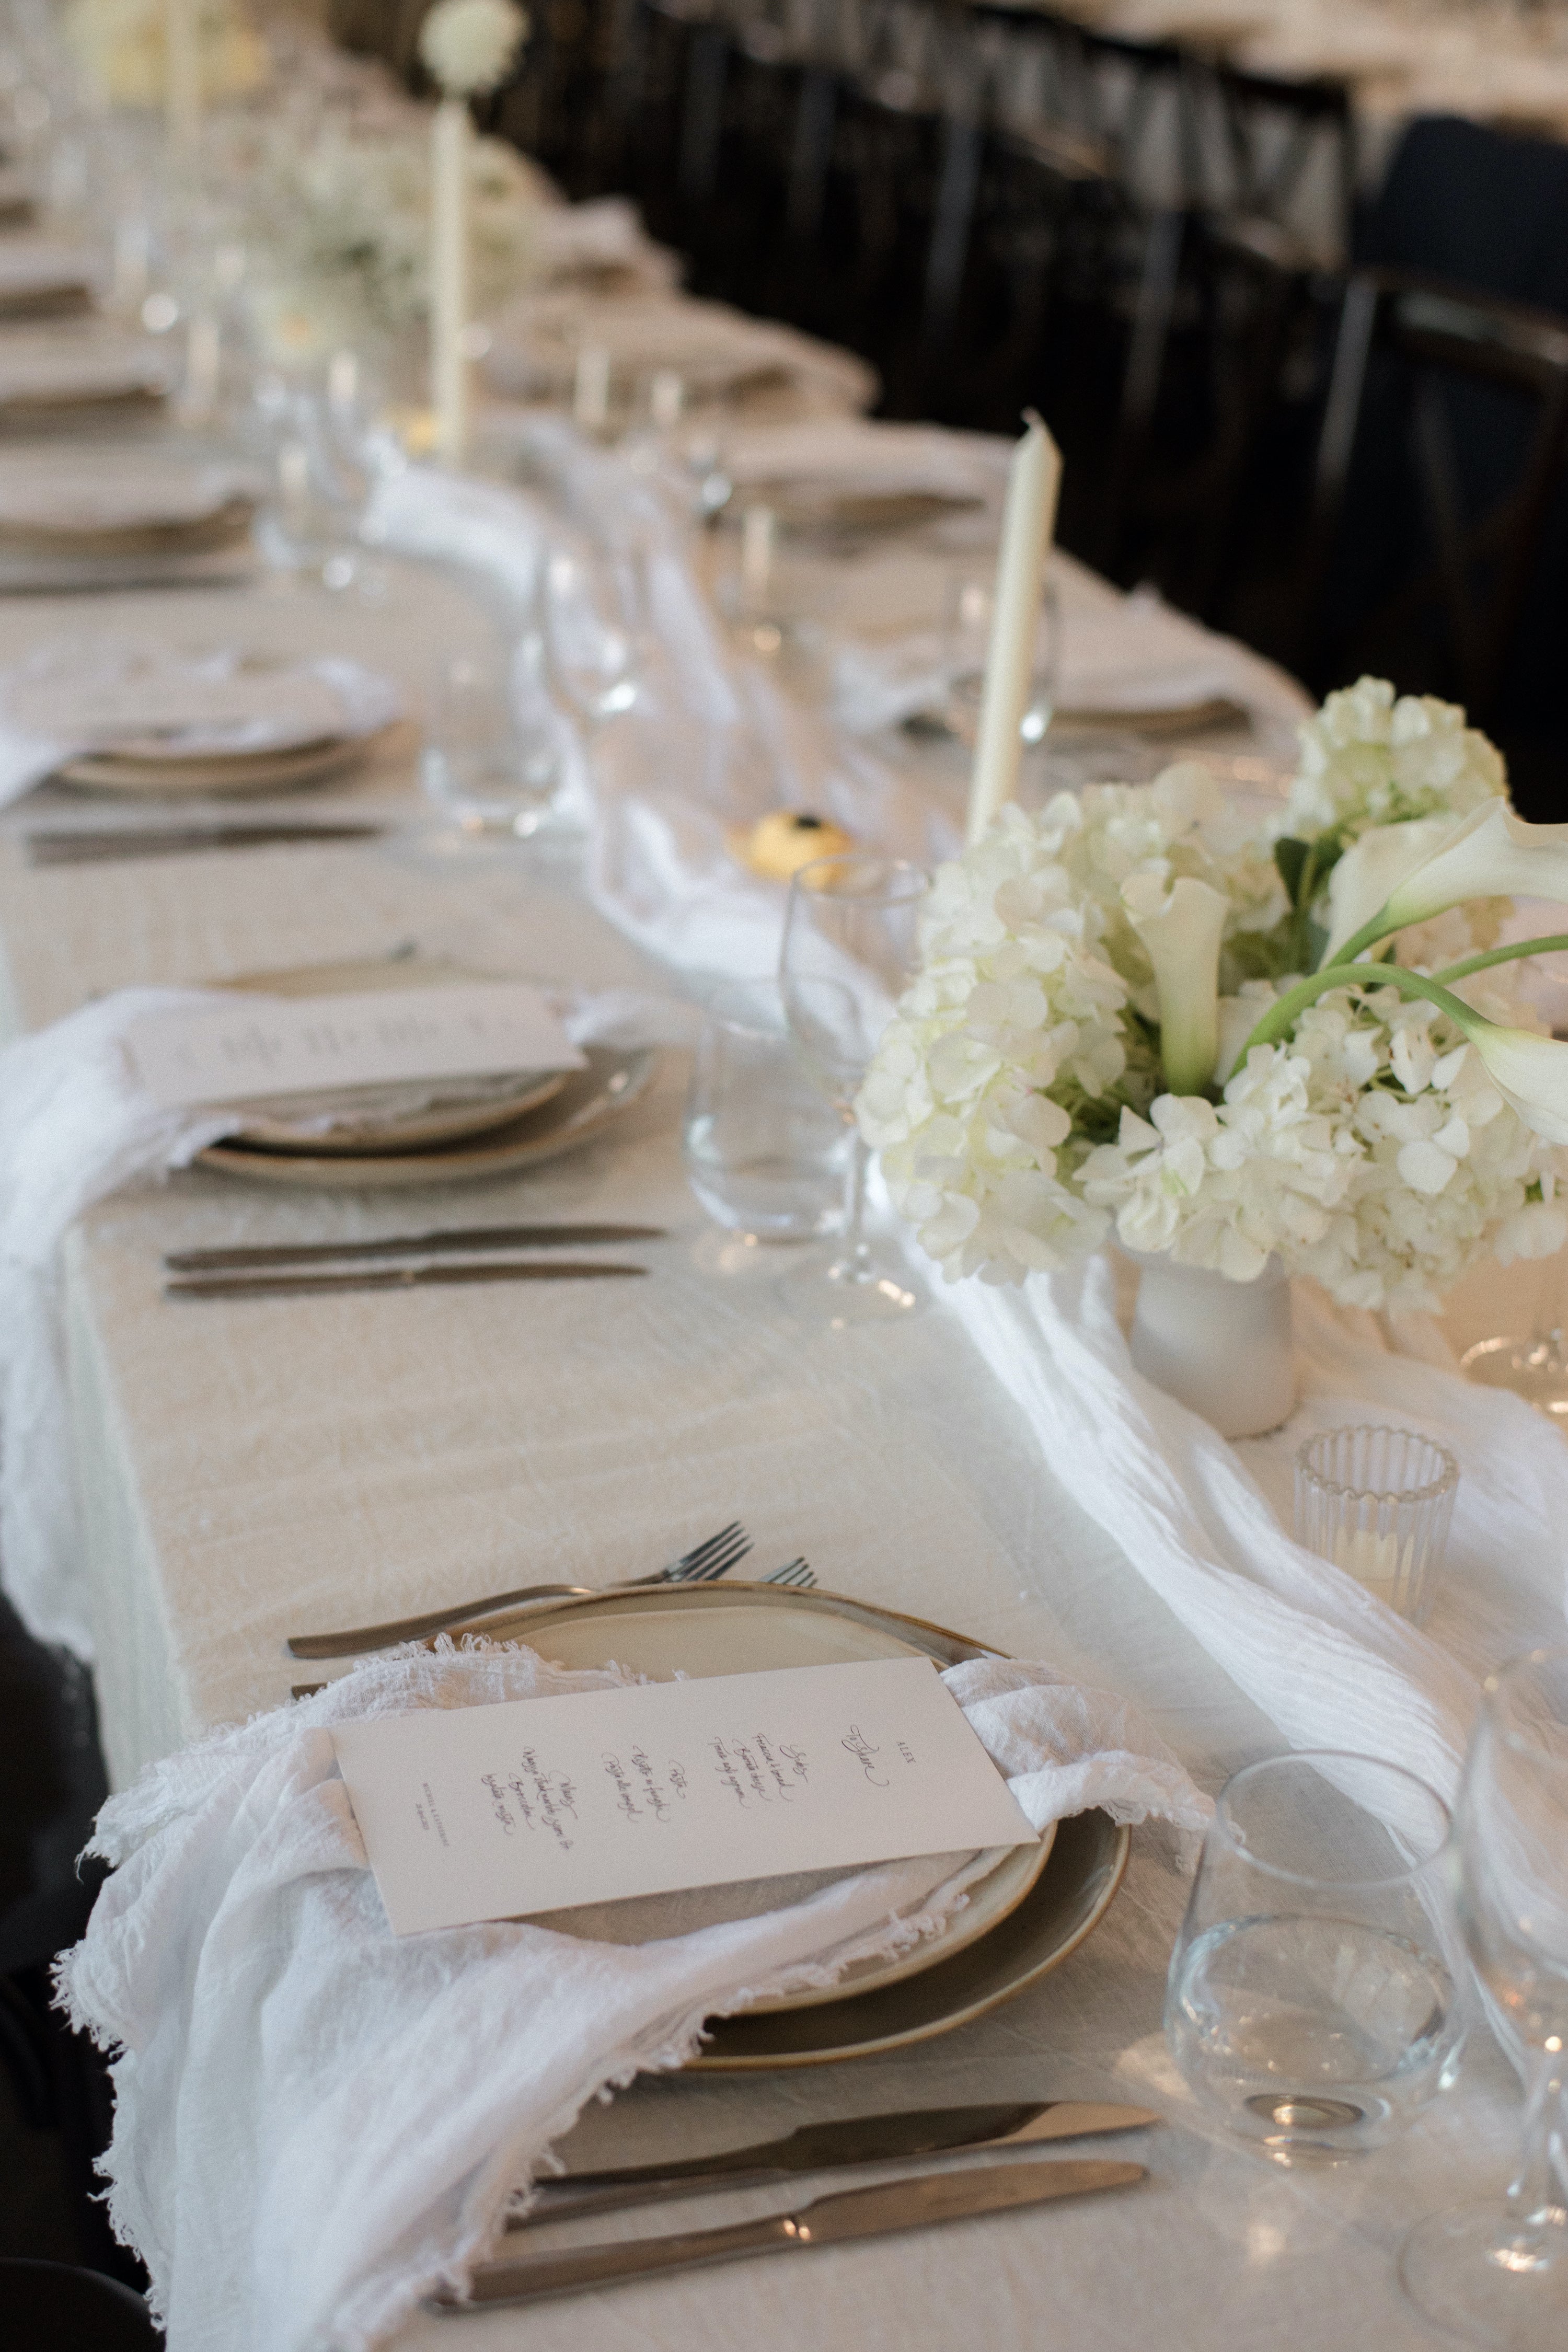 White Textured Cotton Table Runners